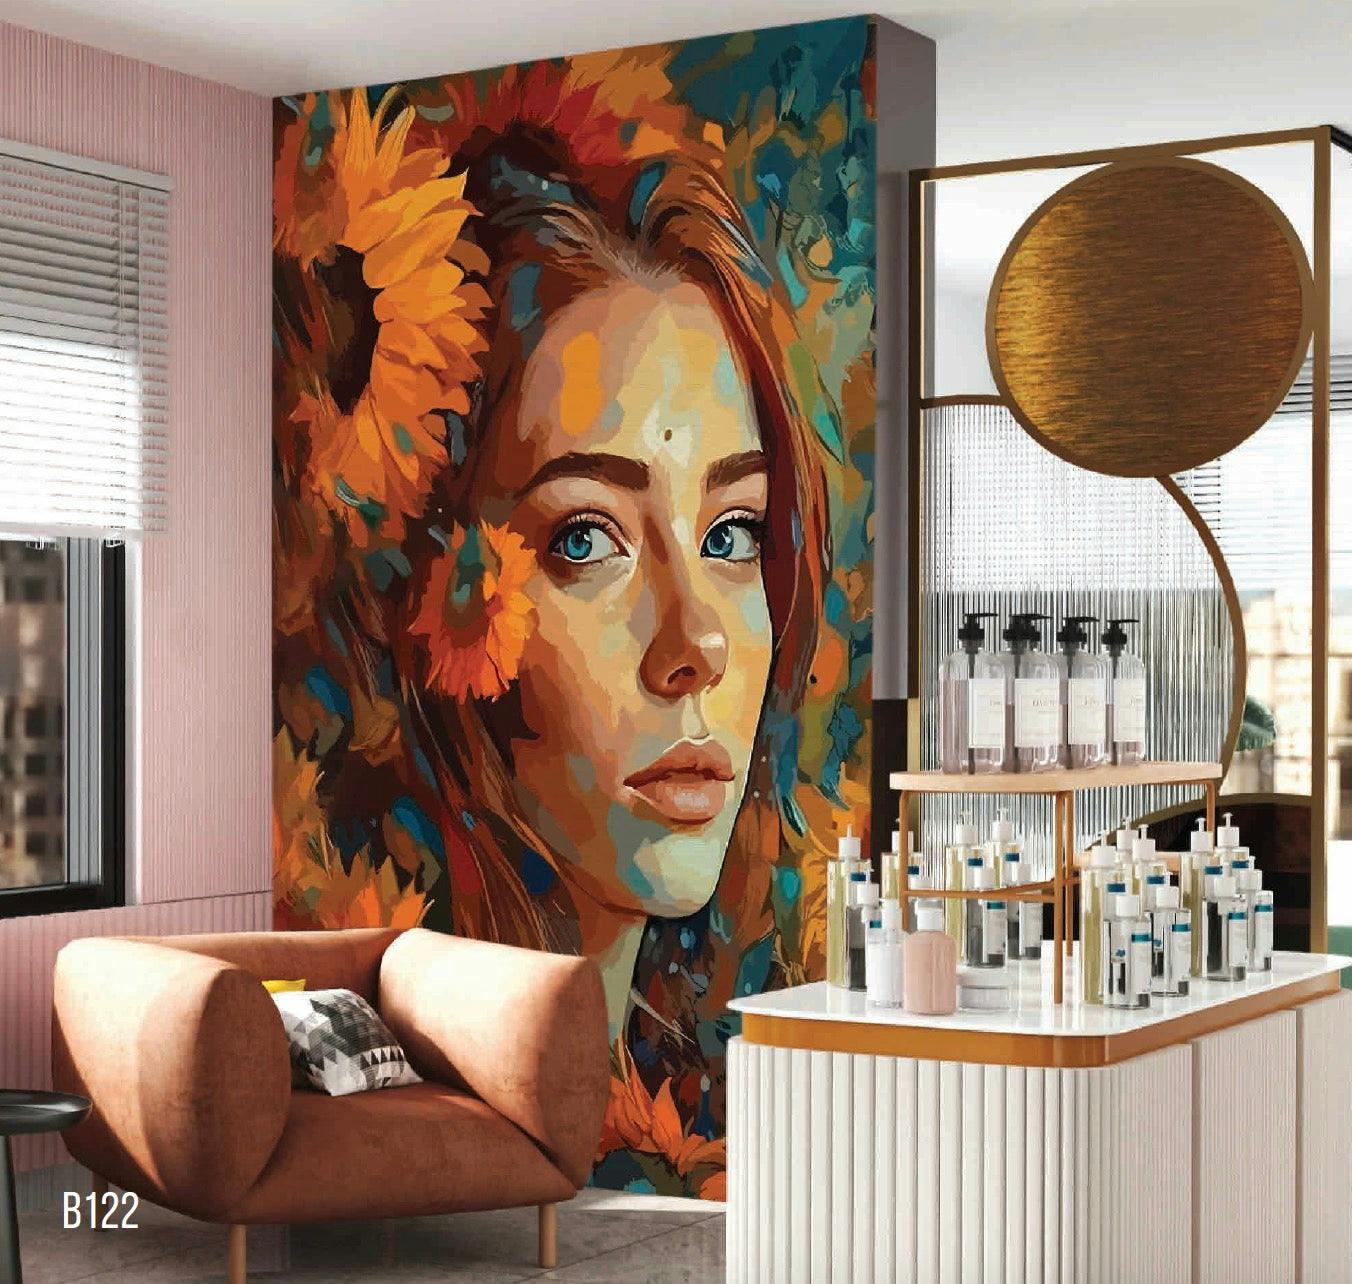 Captivating Red-Headed Lady with Vibrant Floral Crown - High-Quality Fiber Canvas Mural from Elegance Wallpaper